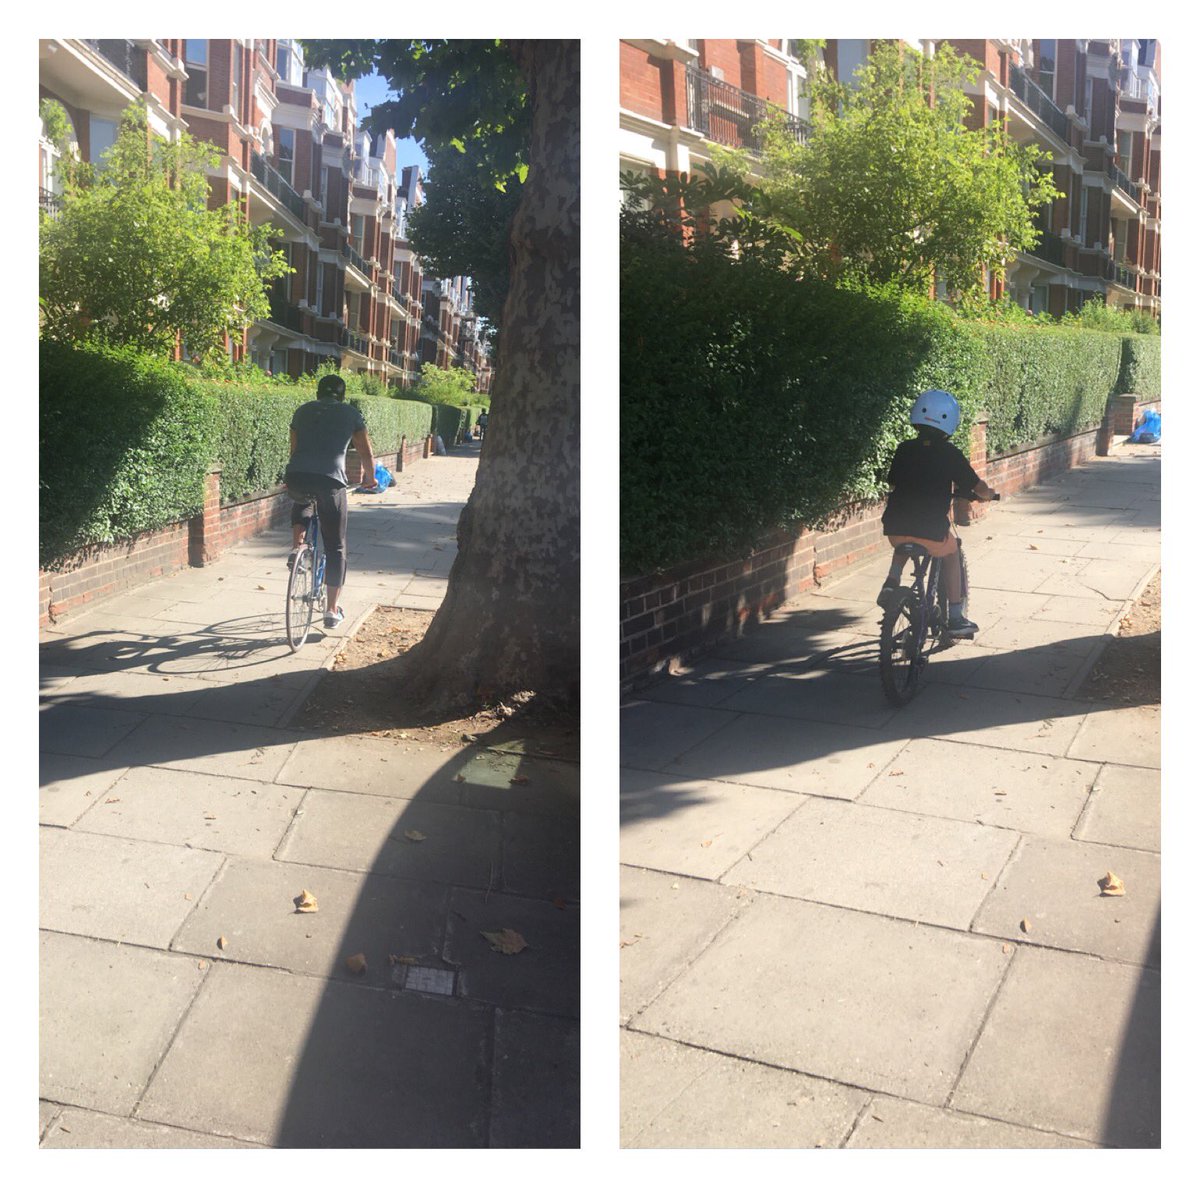 Came back to #maidavale #w9 to see this morning that we now have a #bicyclelane on #elginavenue specifically made for families... #totalanarchy